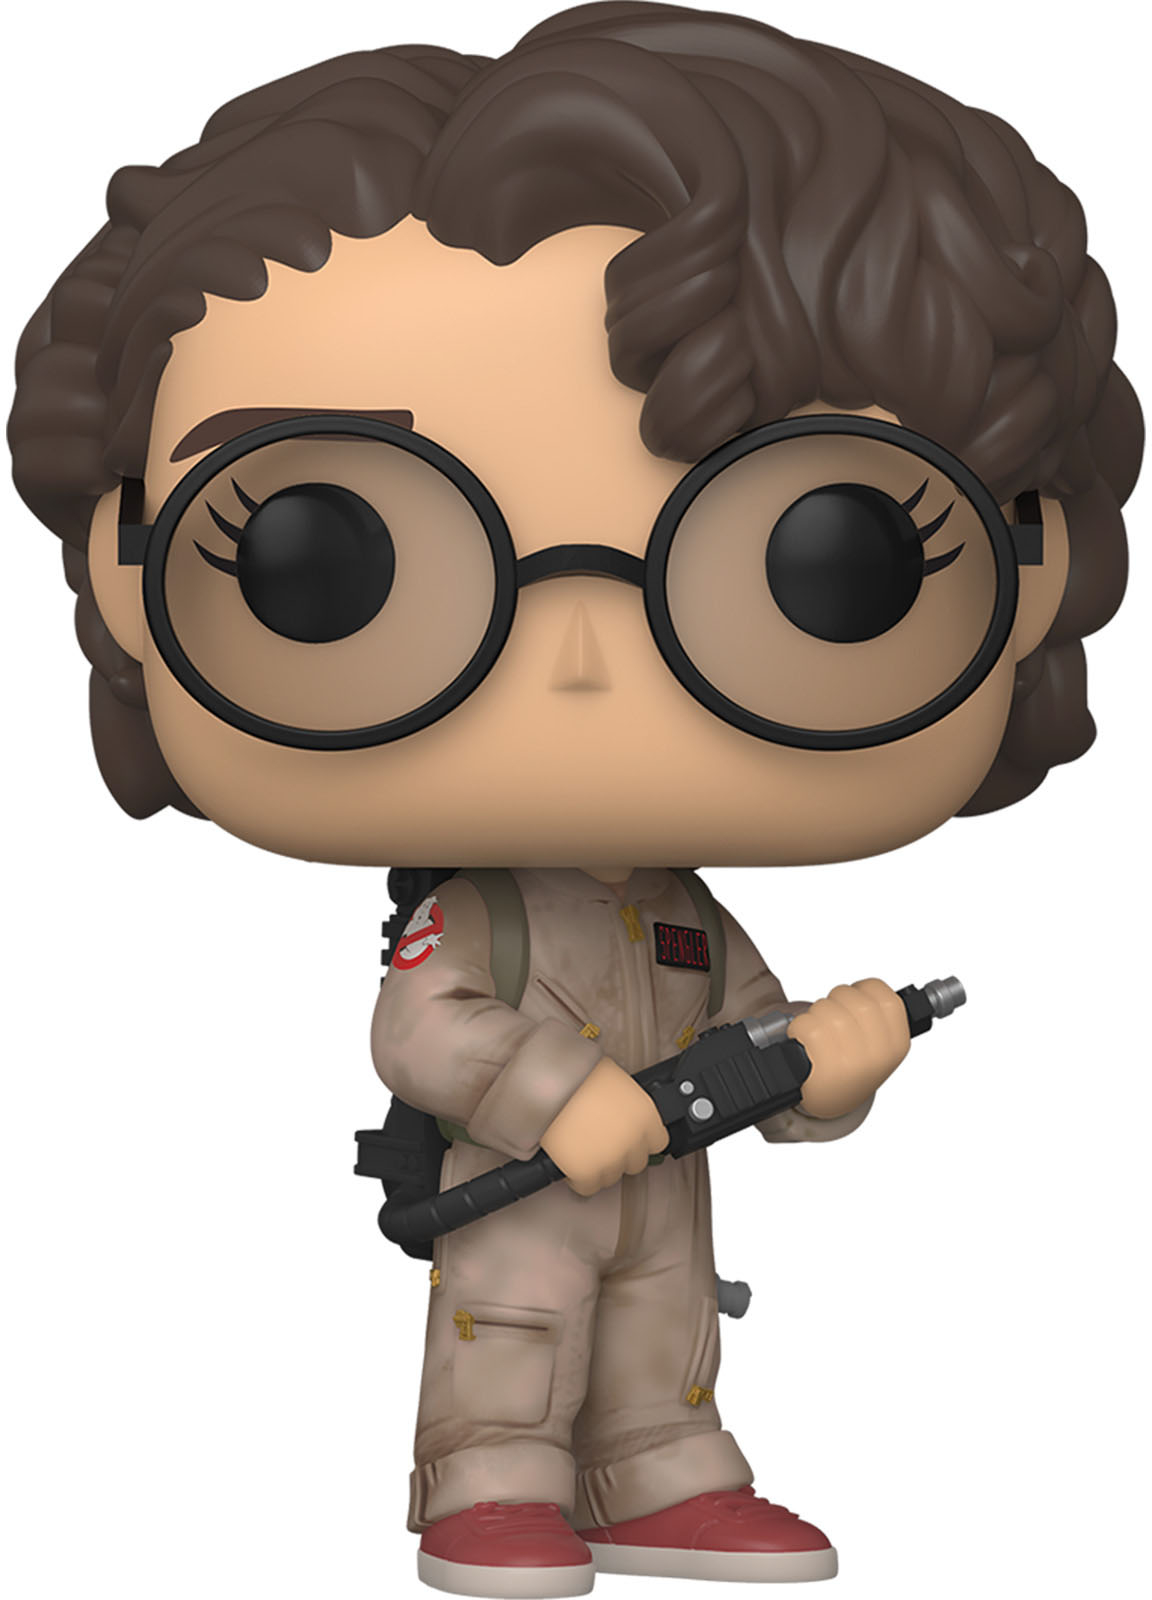 

Funko - POP! Movies: Ghostbusters: Afterlife - Phoebe